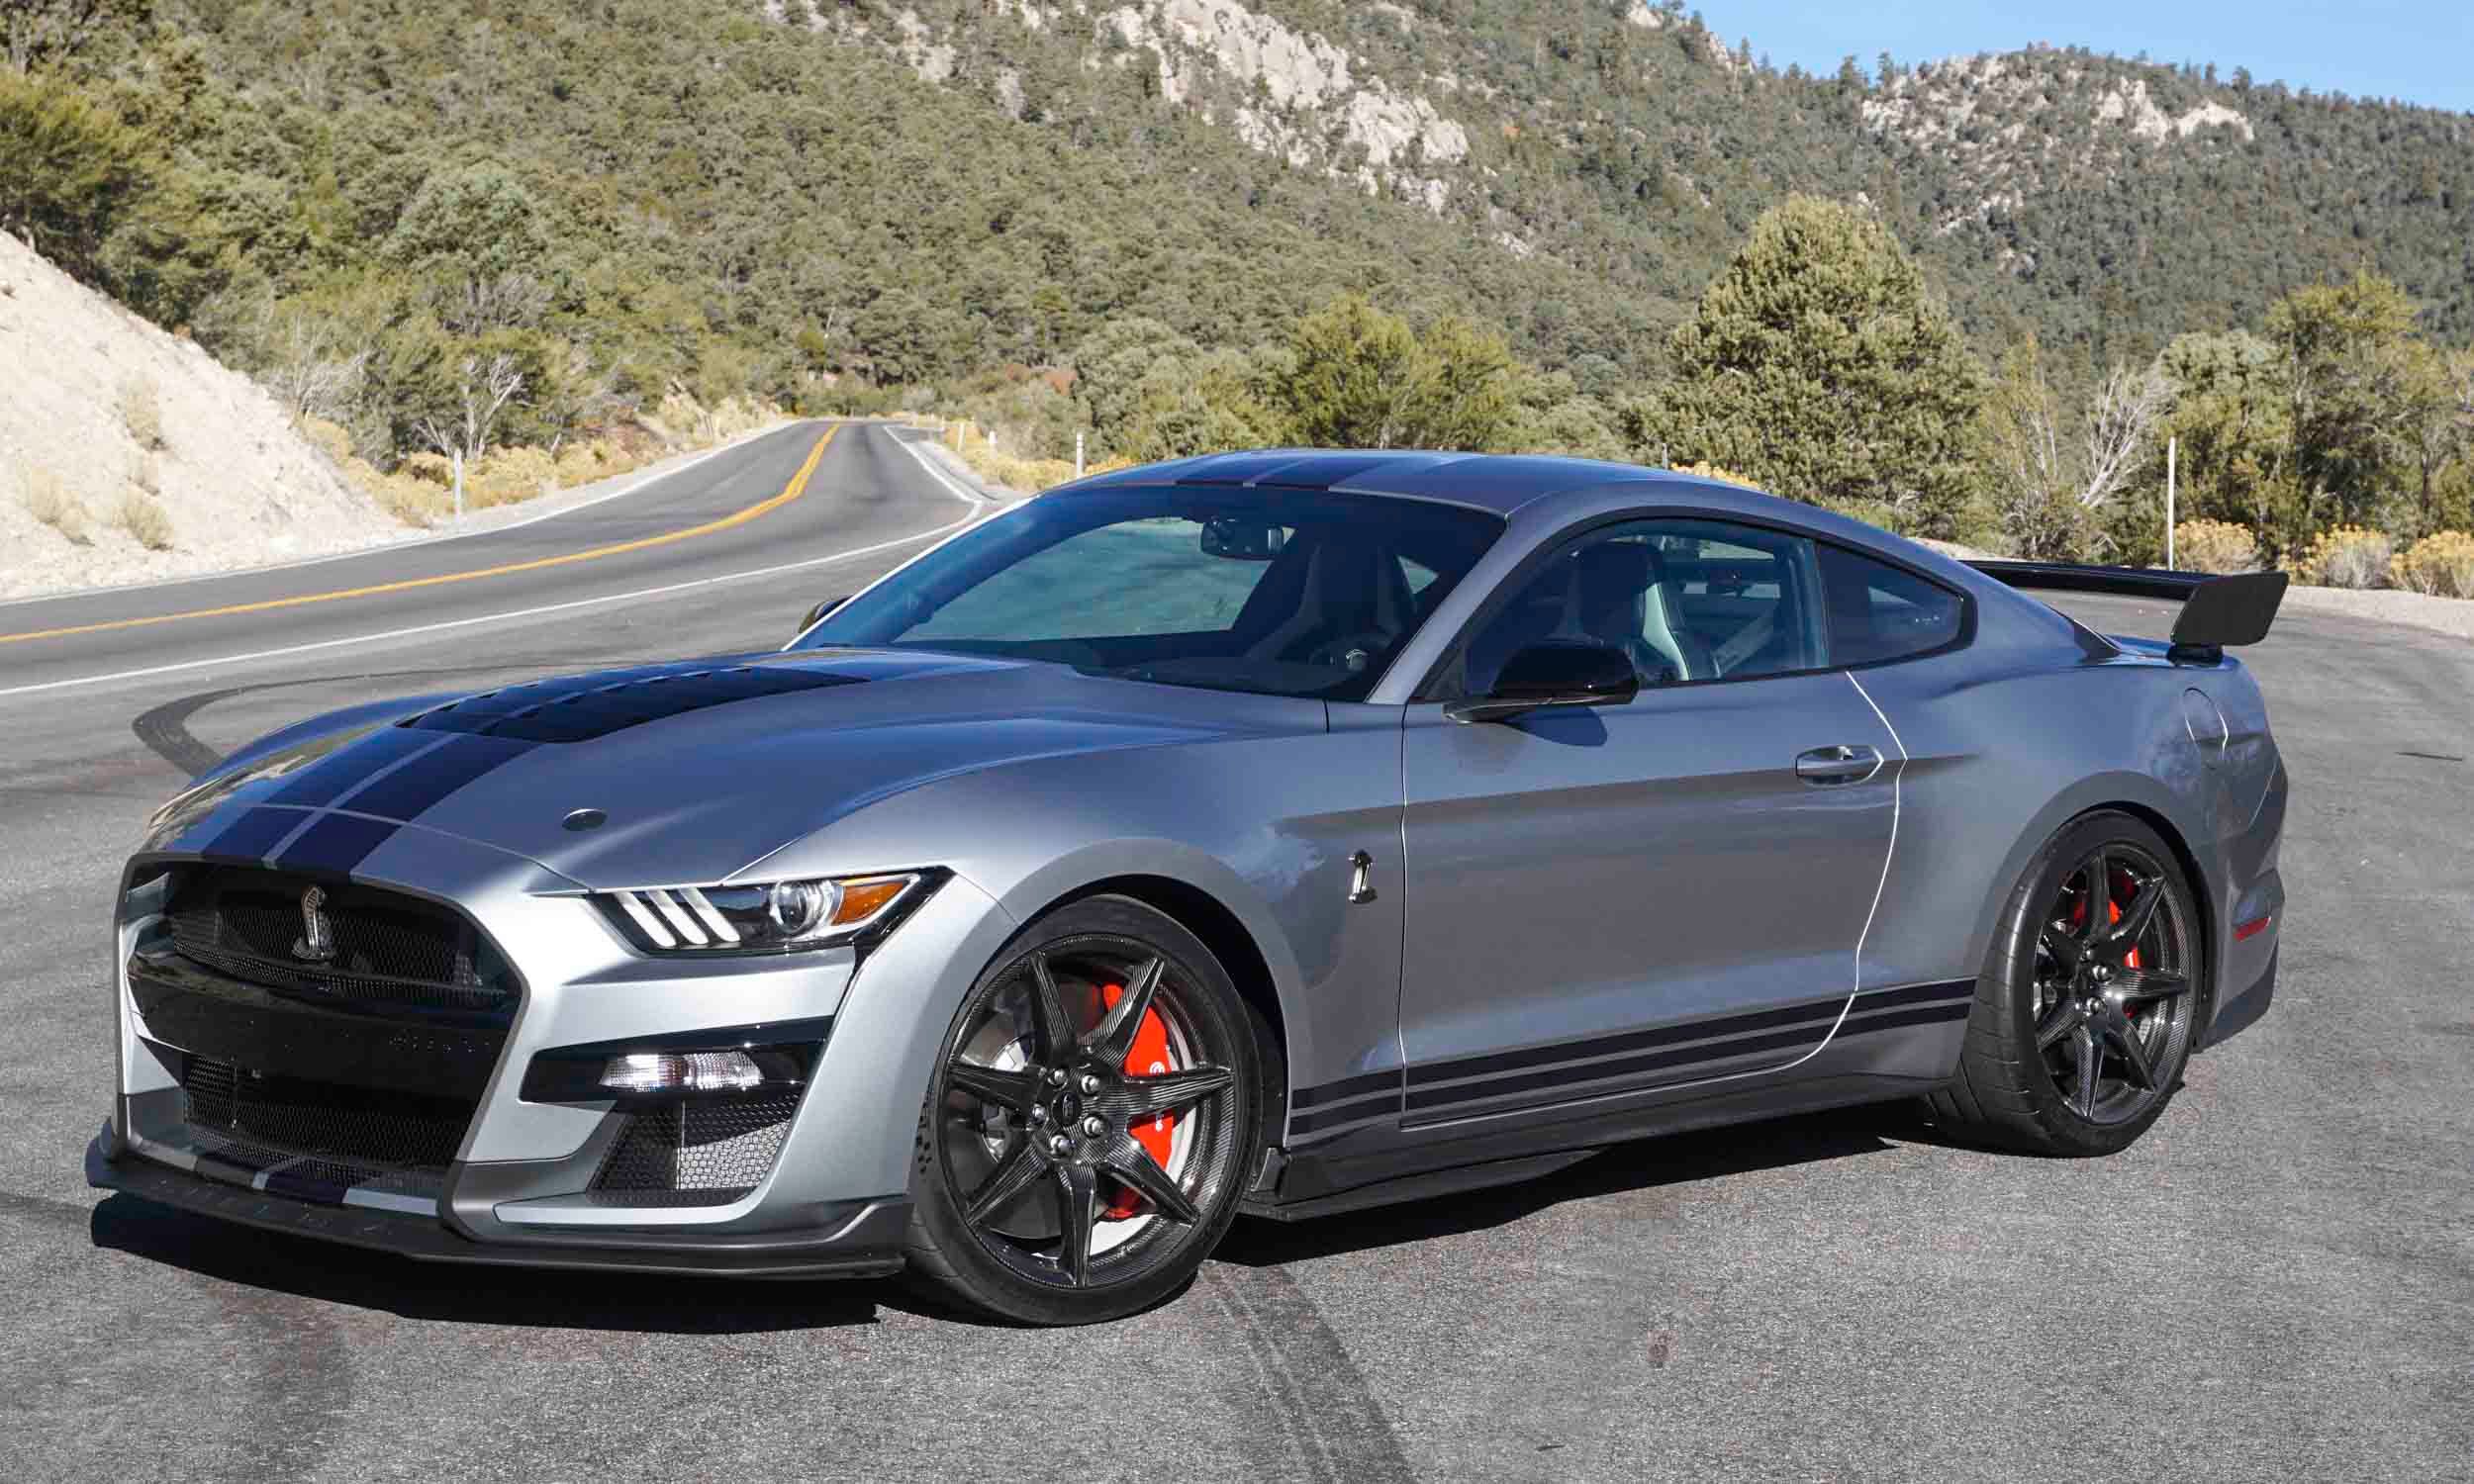 Ford Mustang Shelby GT500 on the road